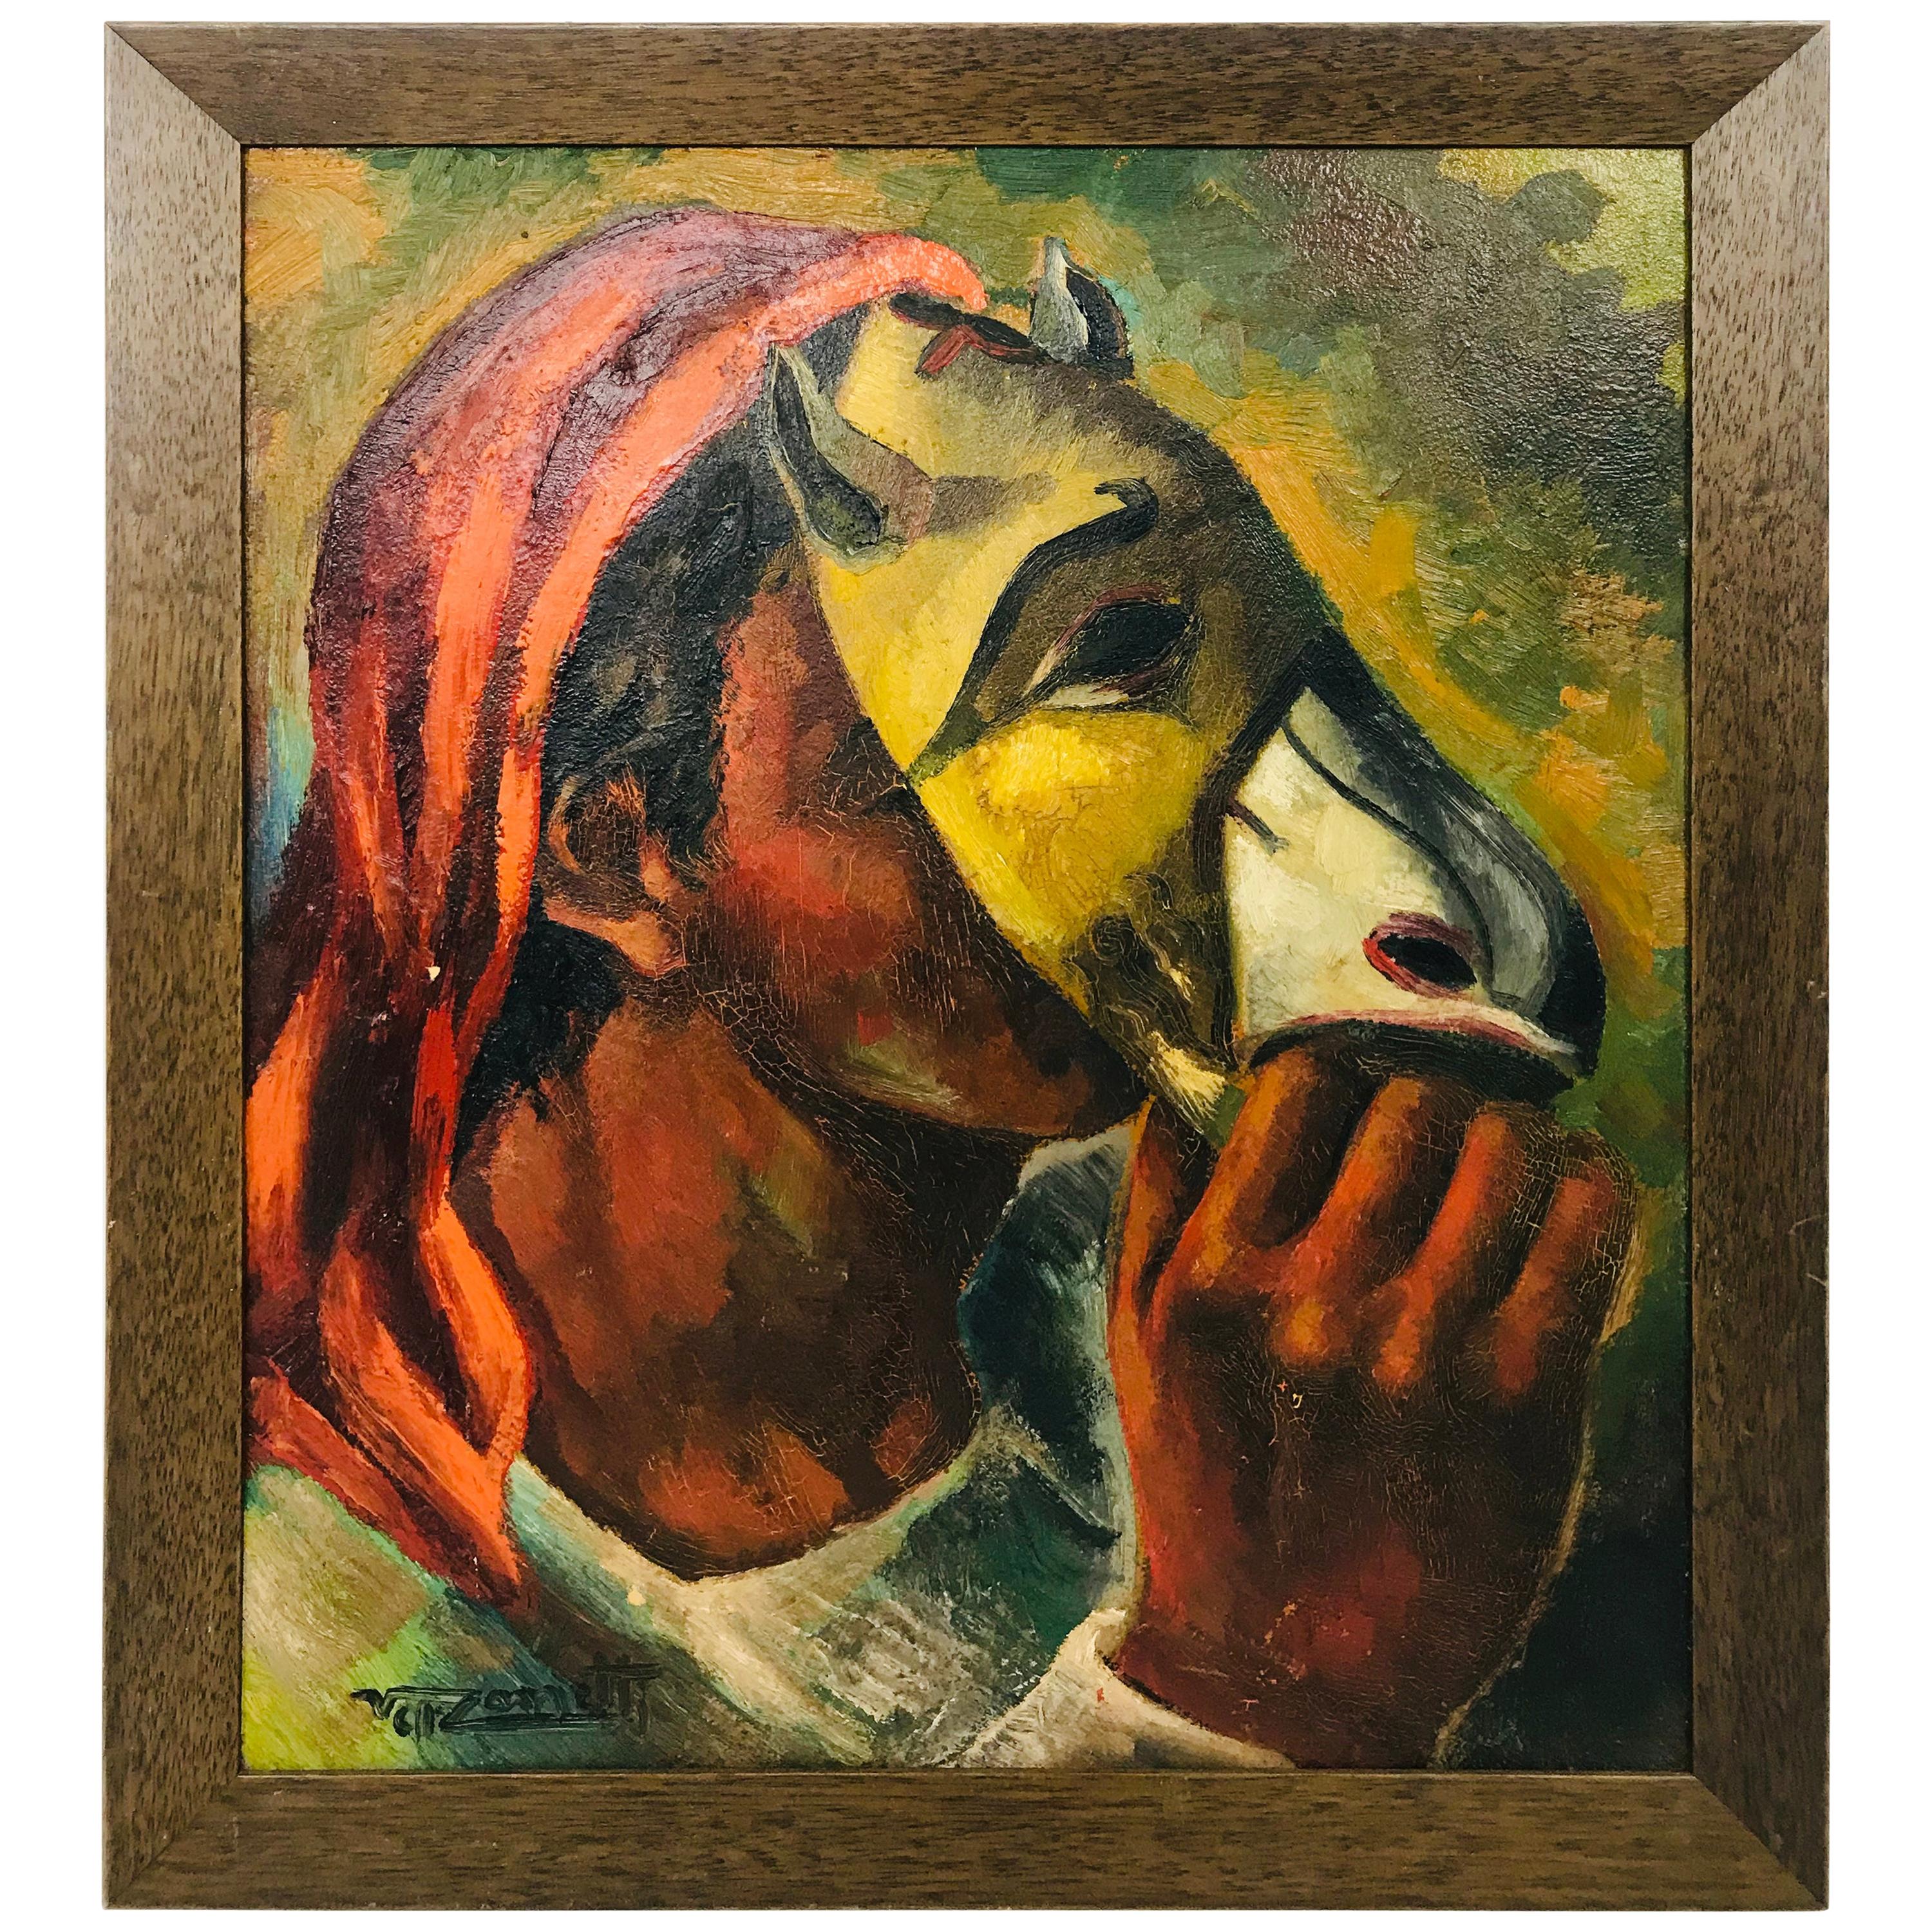 "Boy with a Mask" Oil on Board by Well Listed Spanish Artist Jose Vela Zanetti